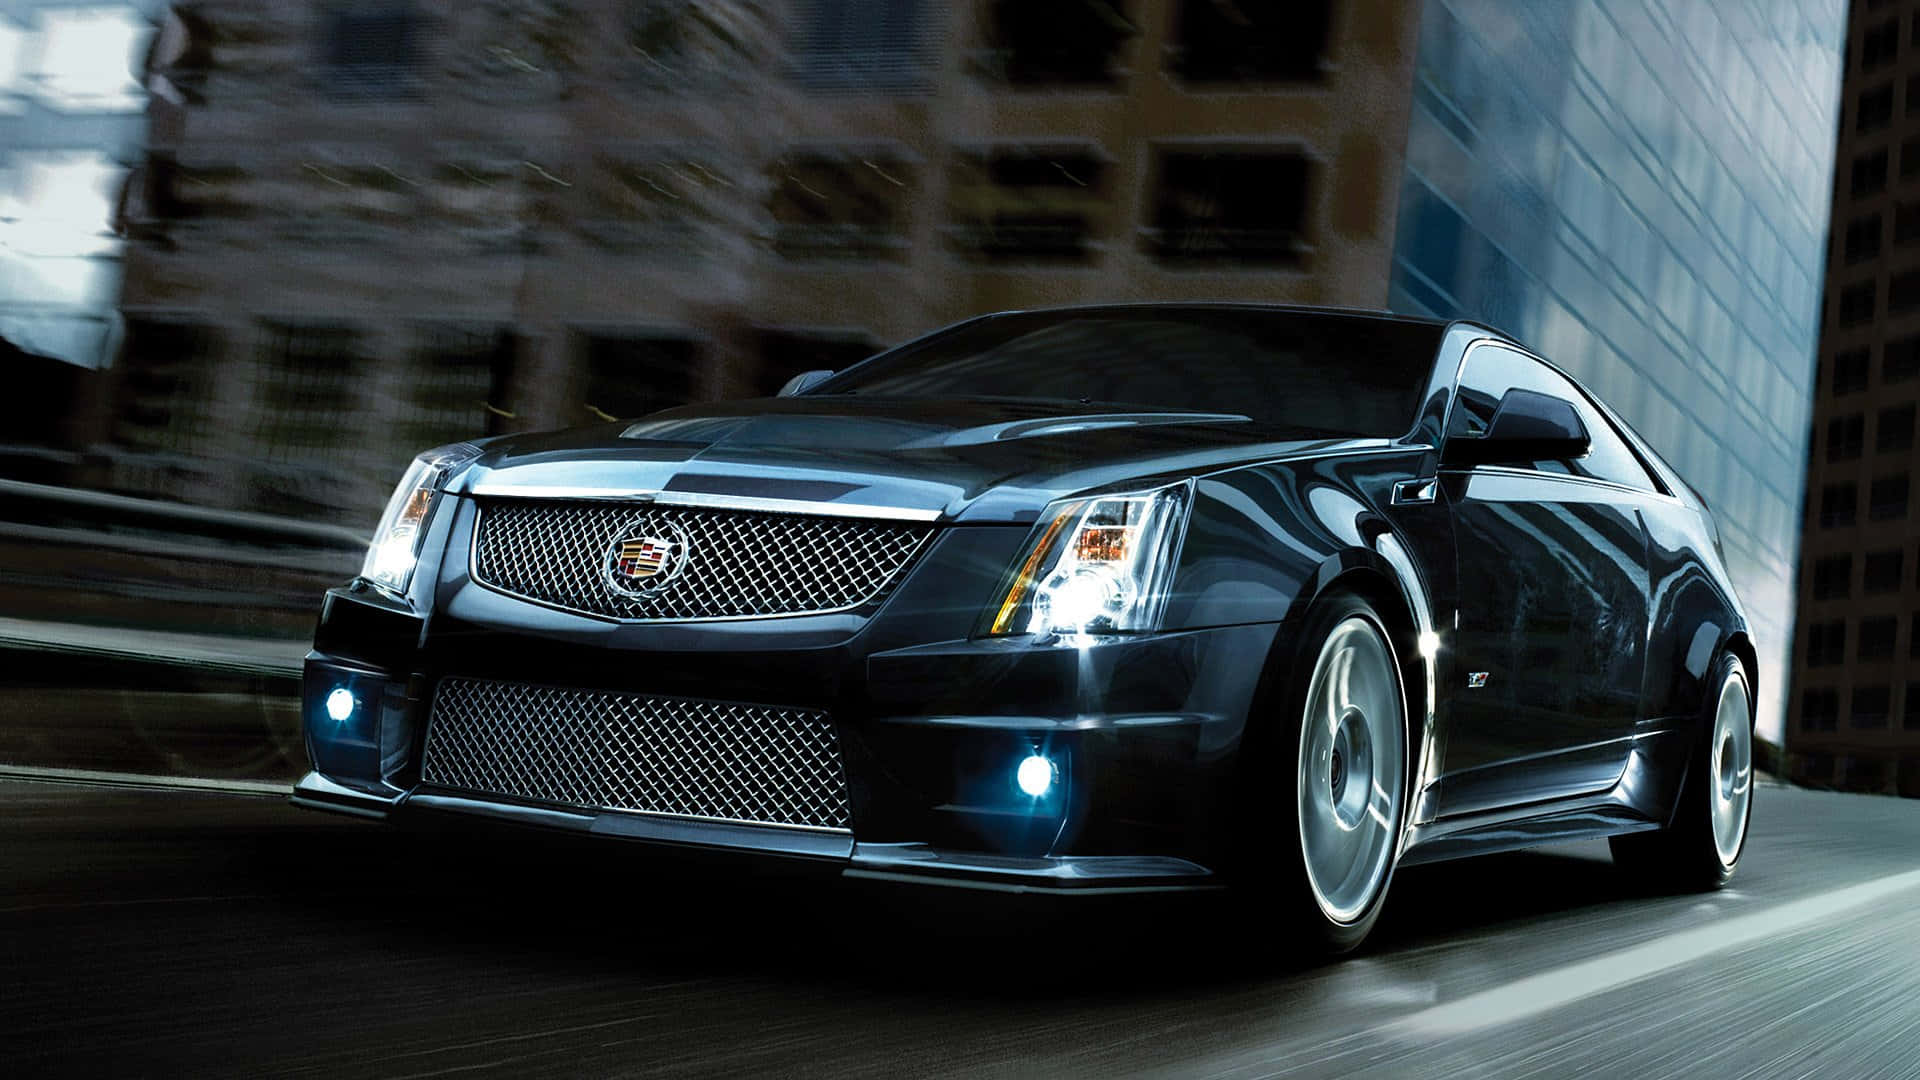 Stunning Cadillac CTS on the Open Road Wallpaper